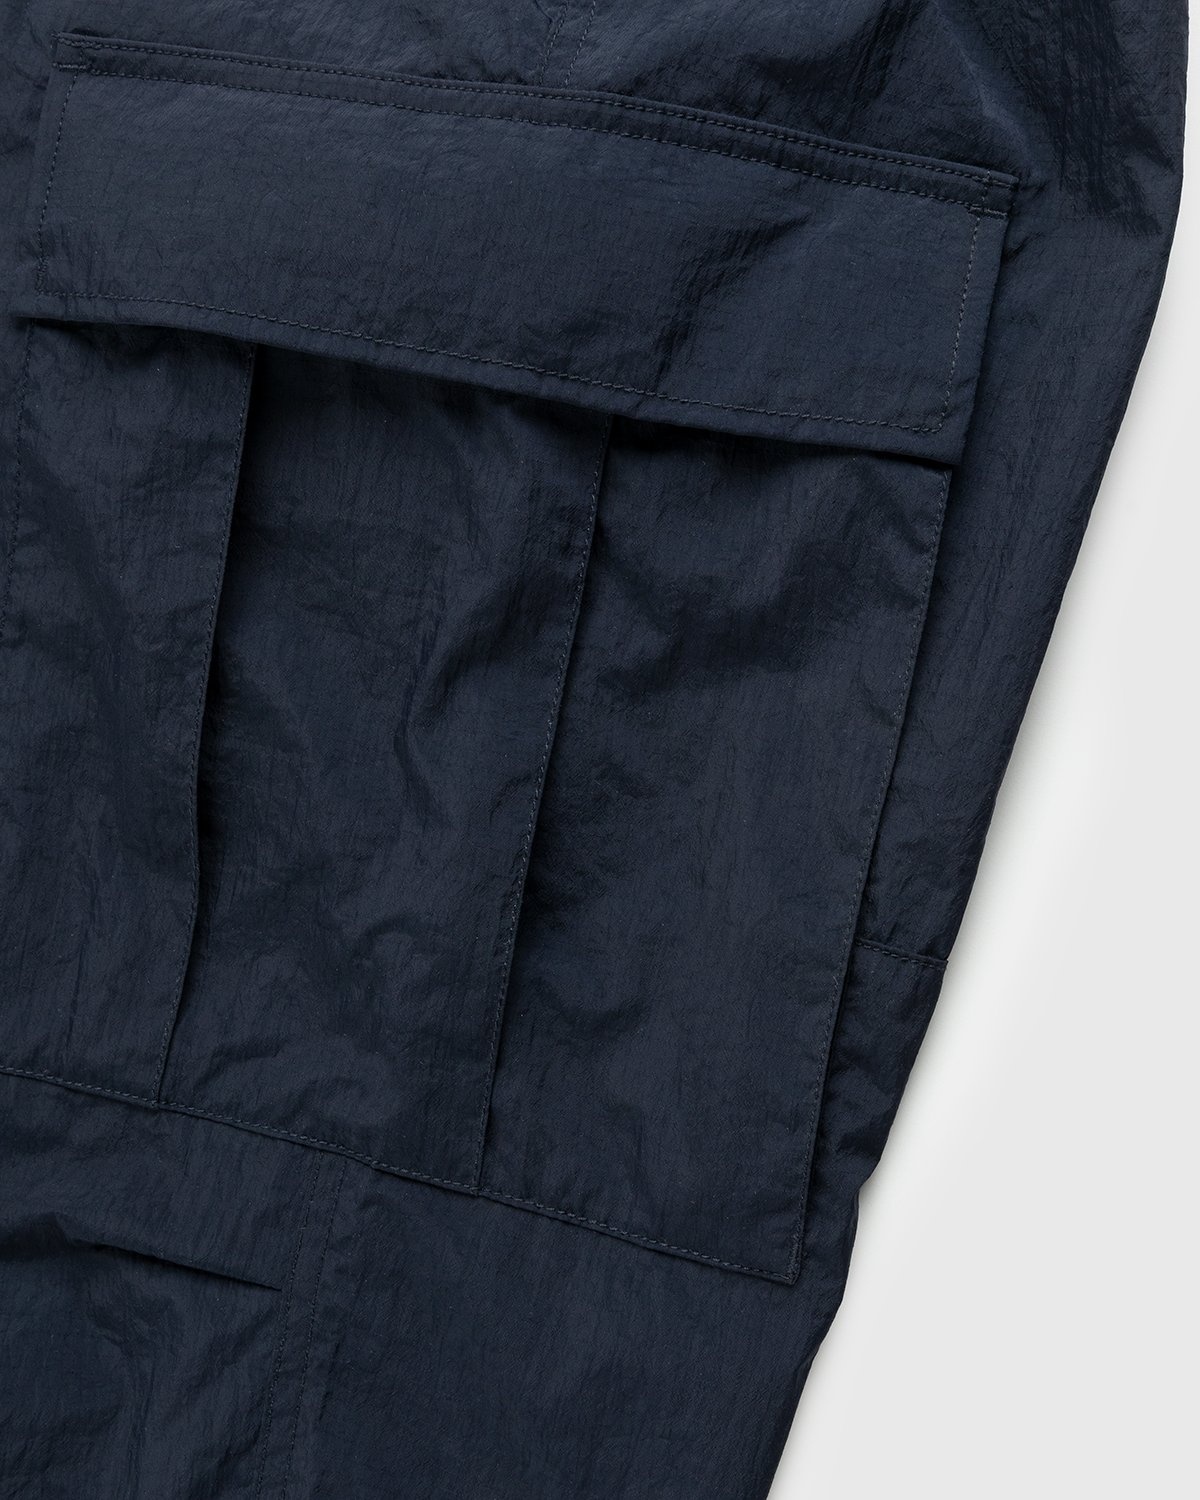 Highsnobiety – Water-Resistant Ripstop Cargo Pants Blue - Pants - Blue - Image 6